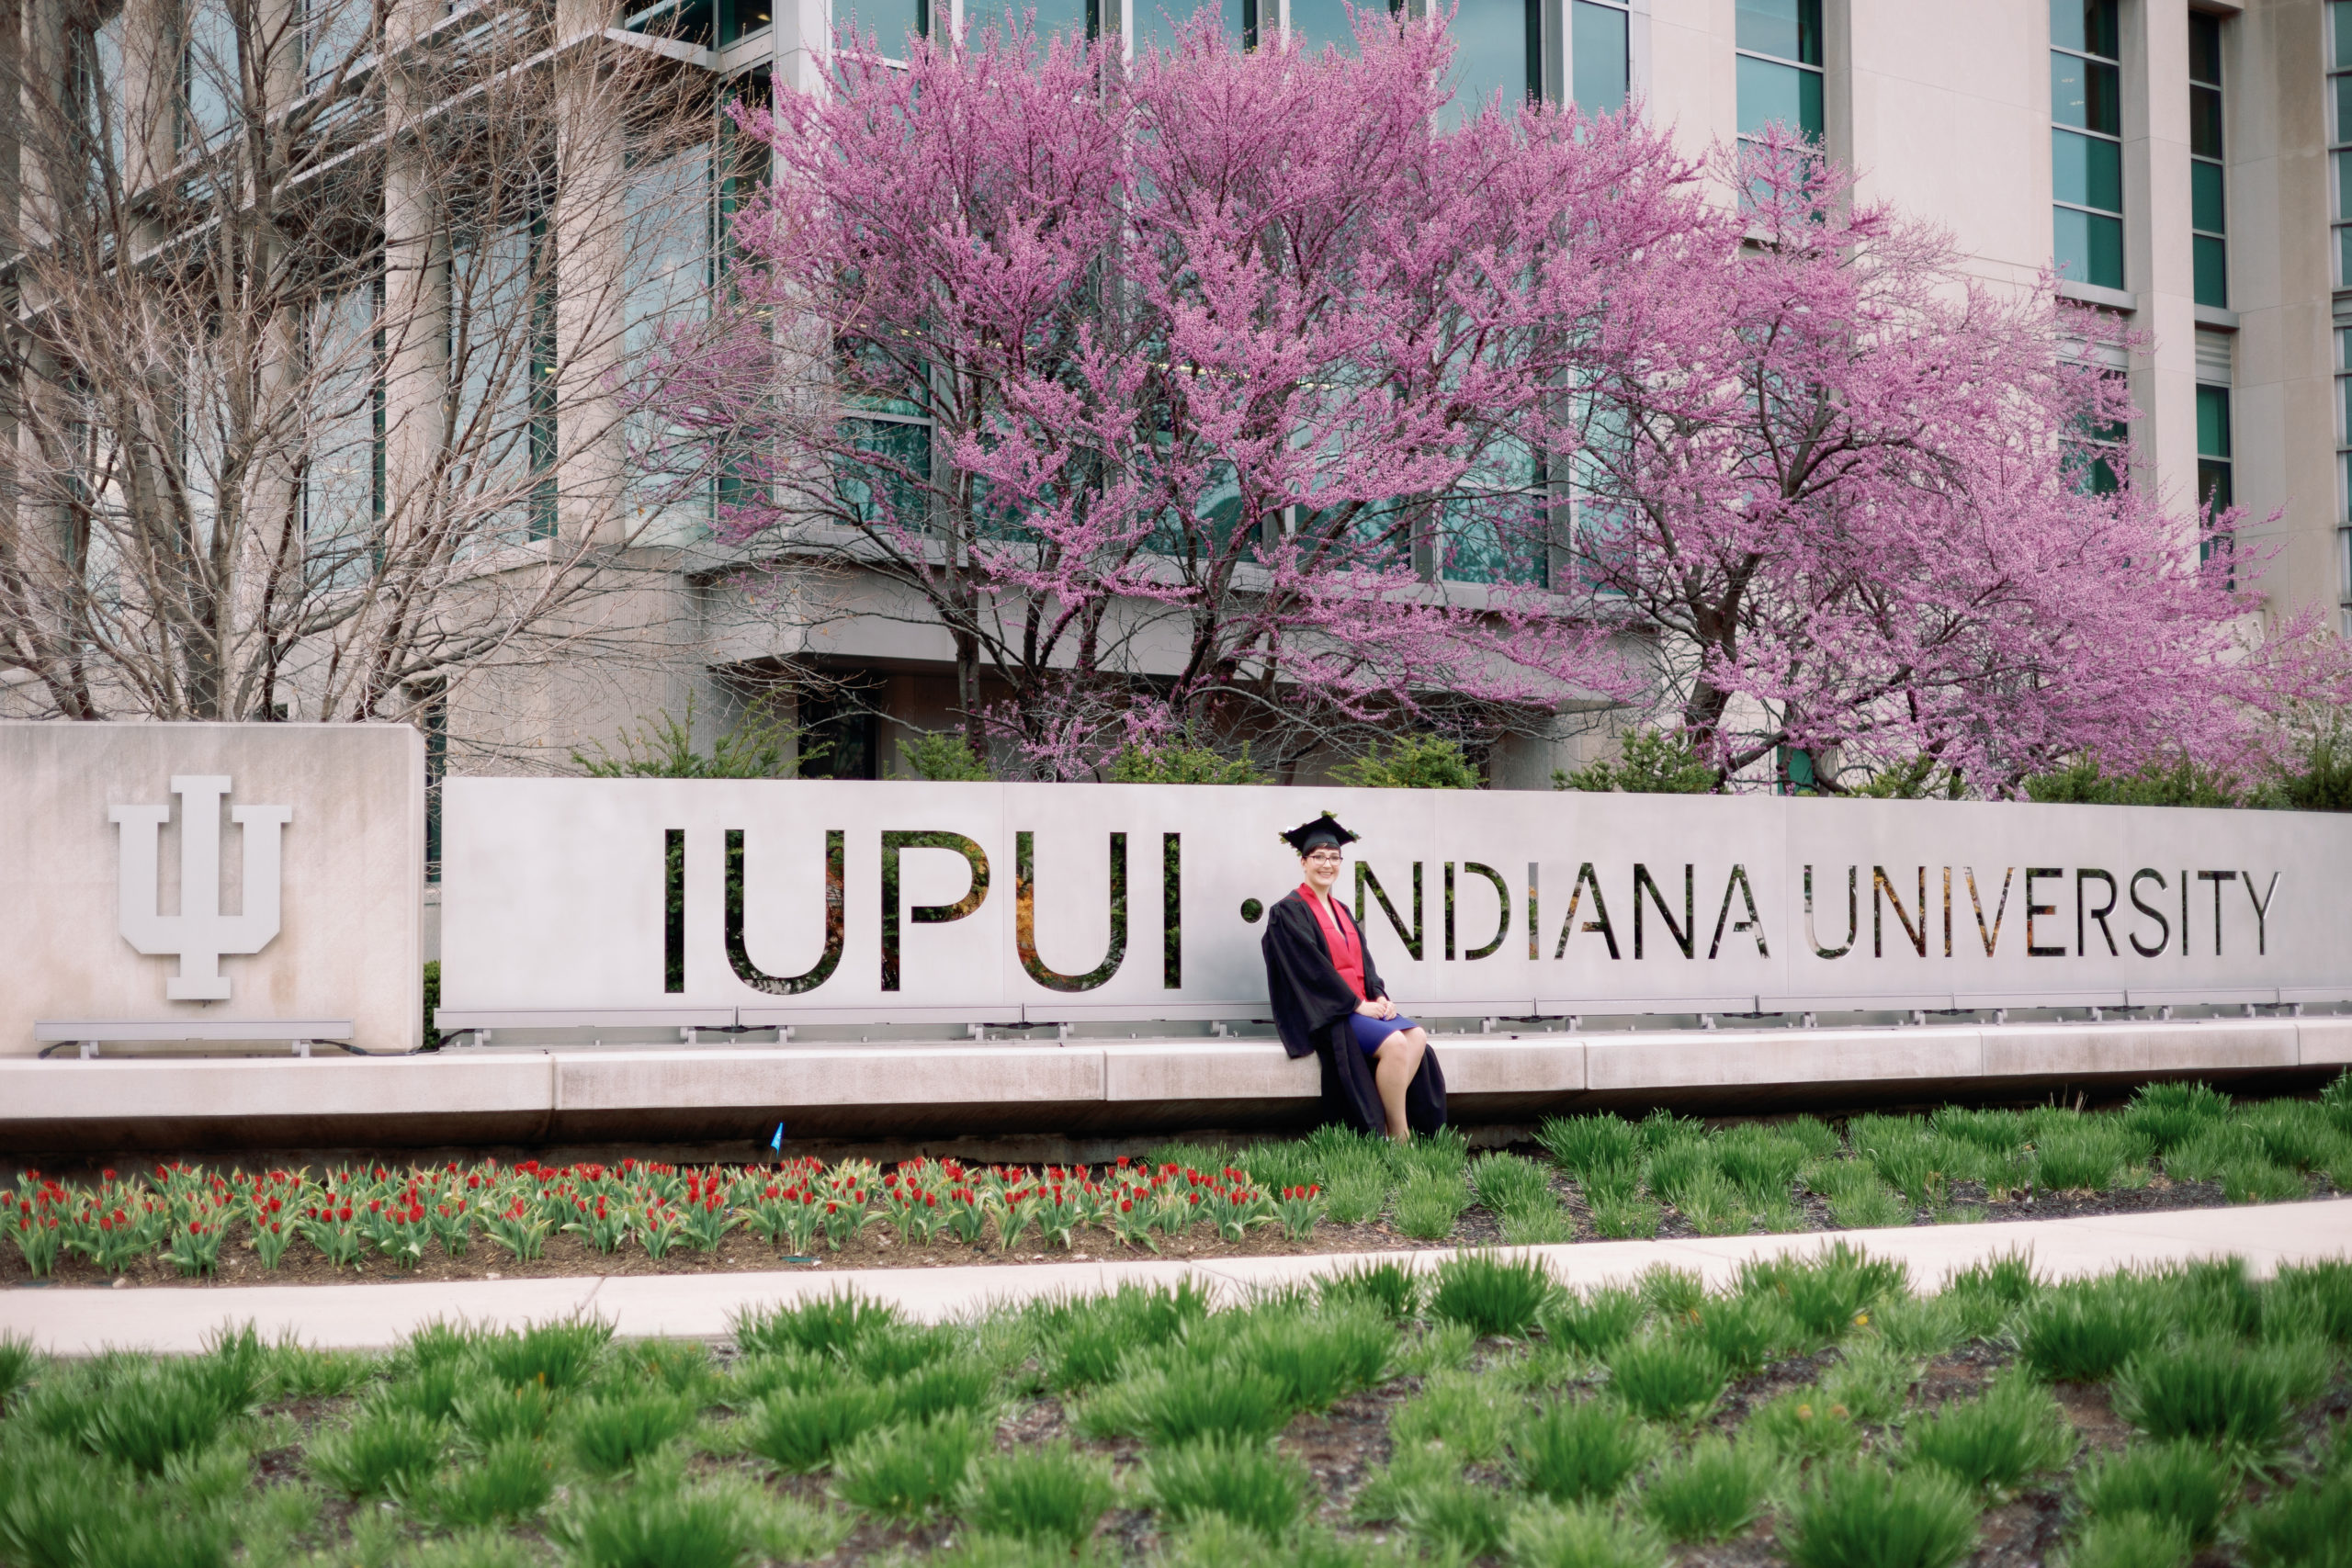 Indianapolis Senior Picture in front of IUPUI sign